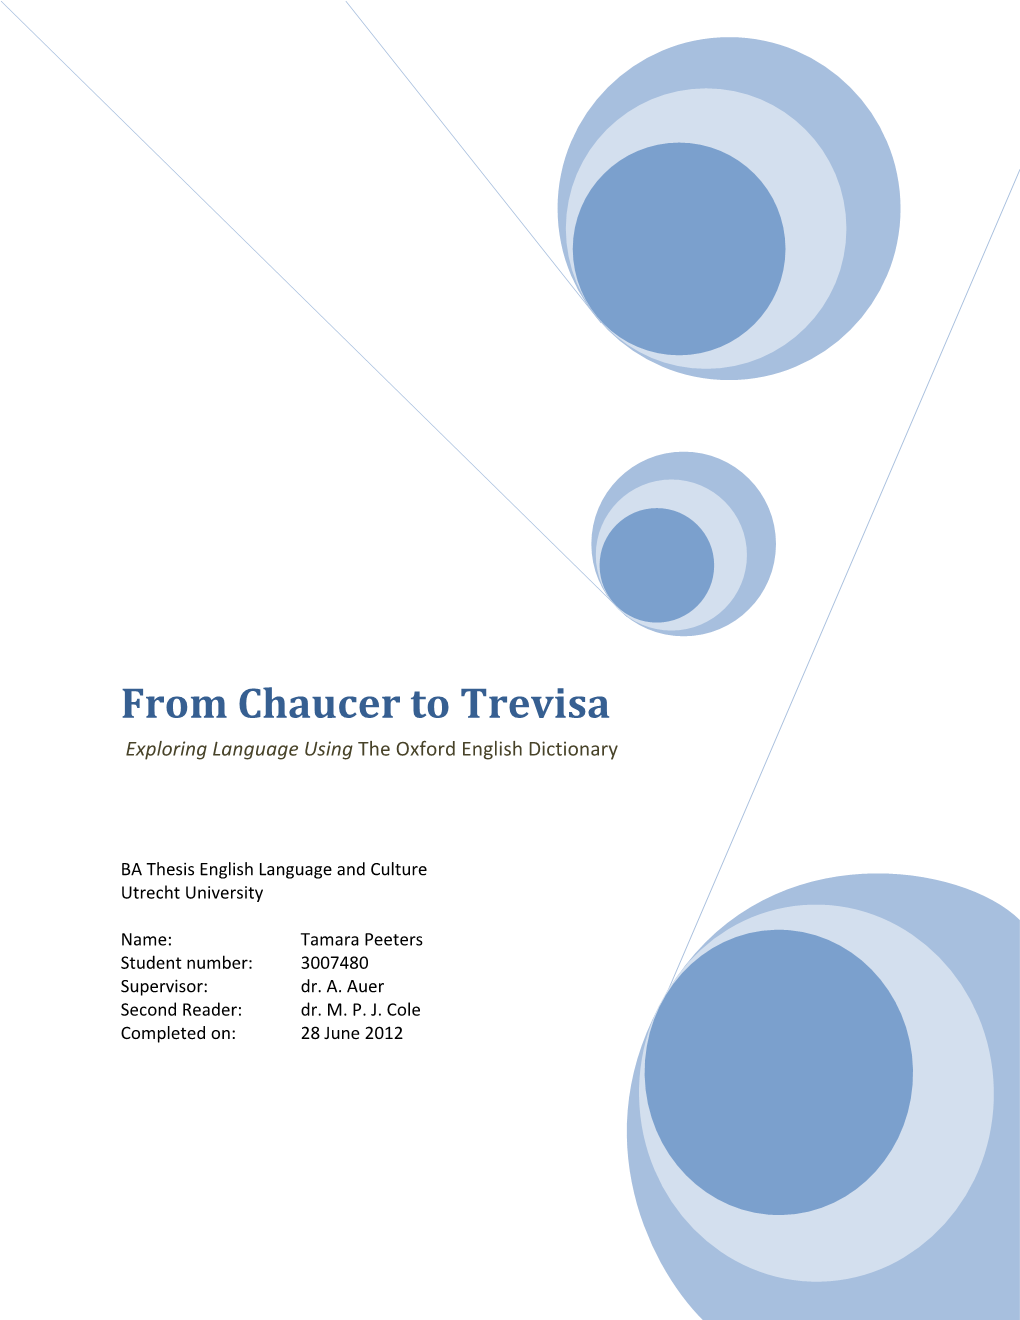 From Chaucer to Trevisa Exploring Language Using the Oxford English Dictionary